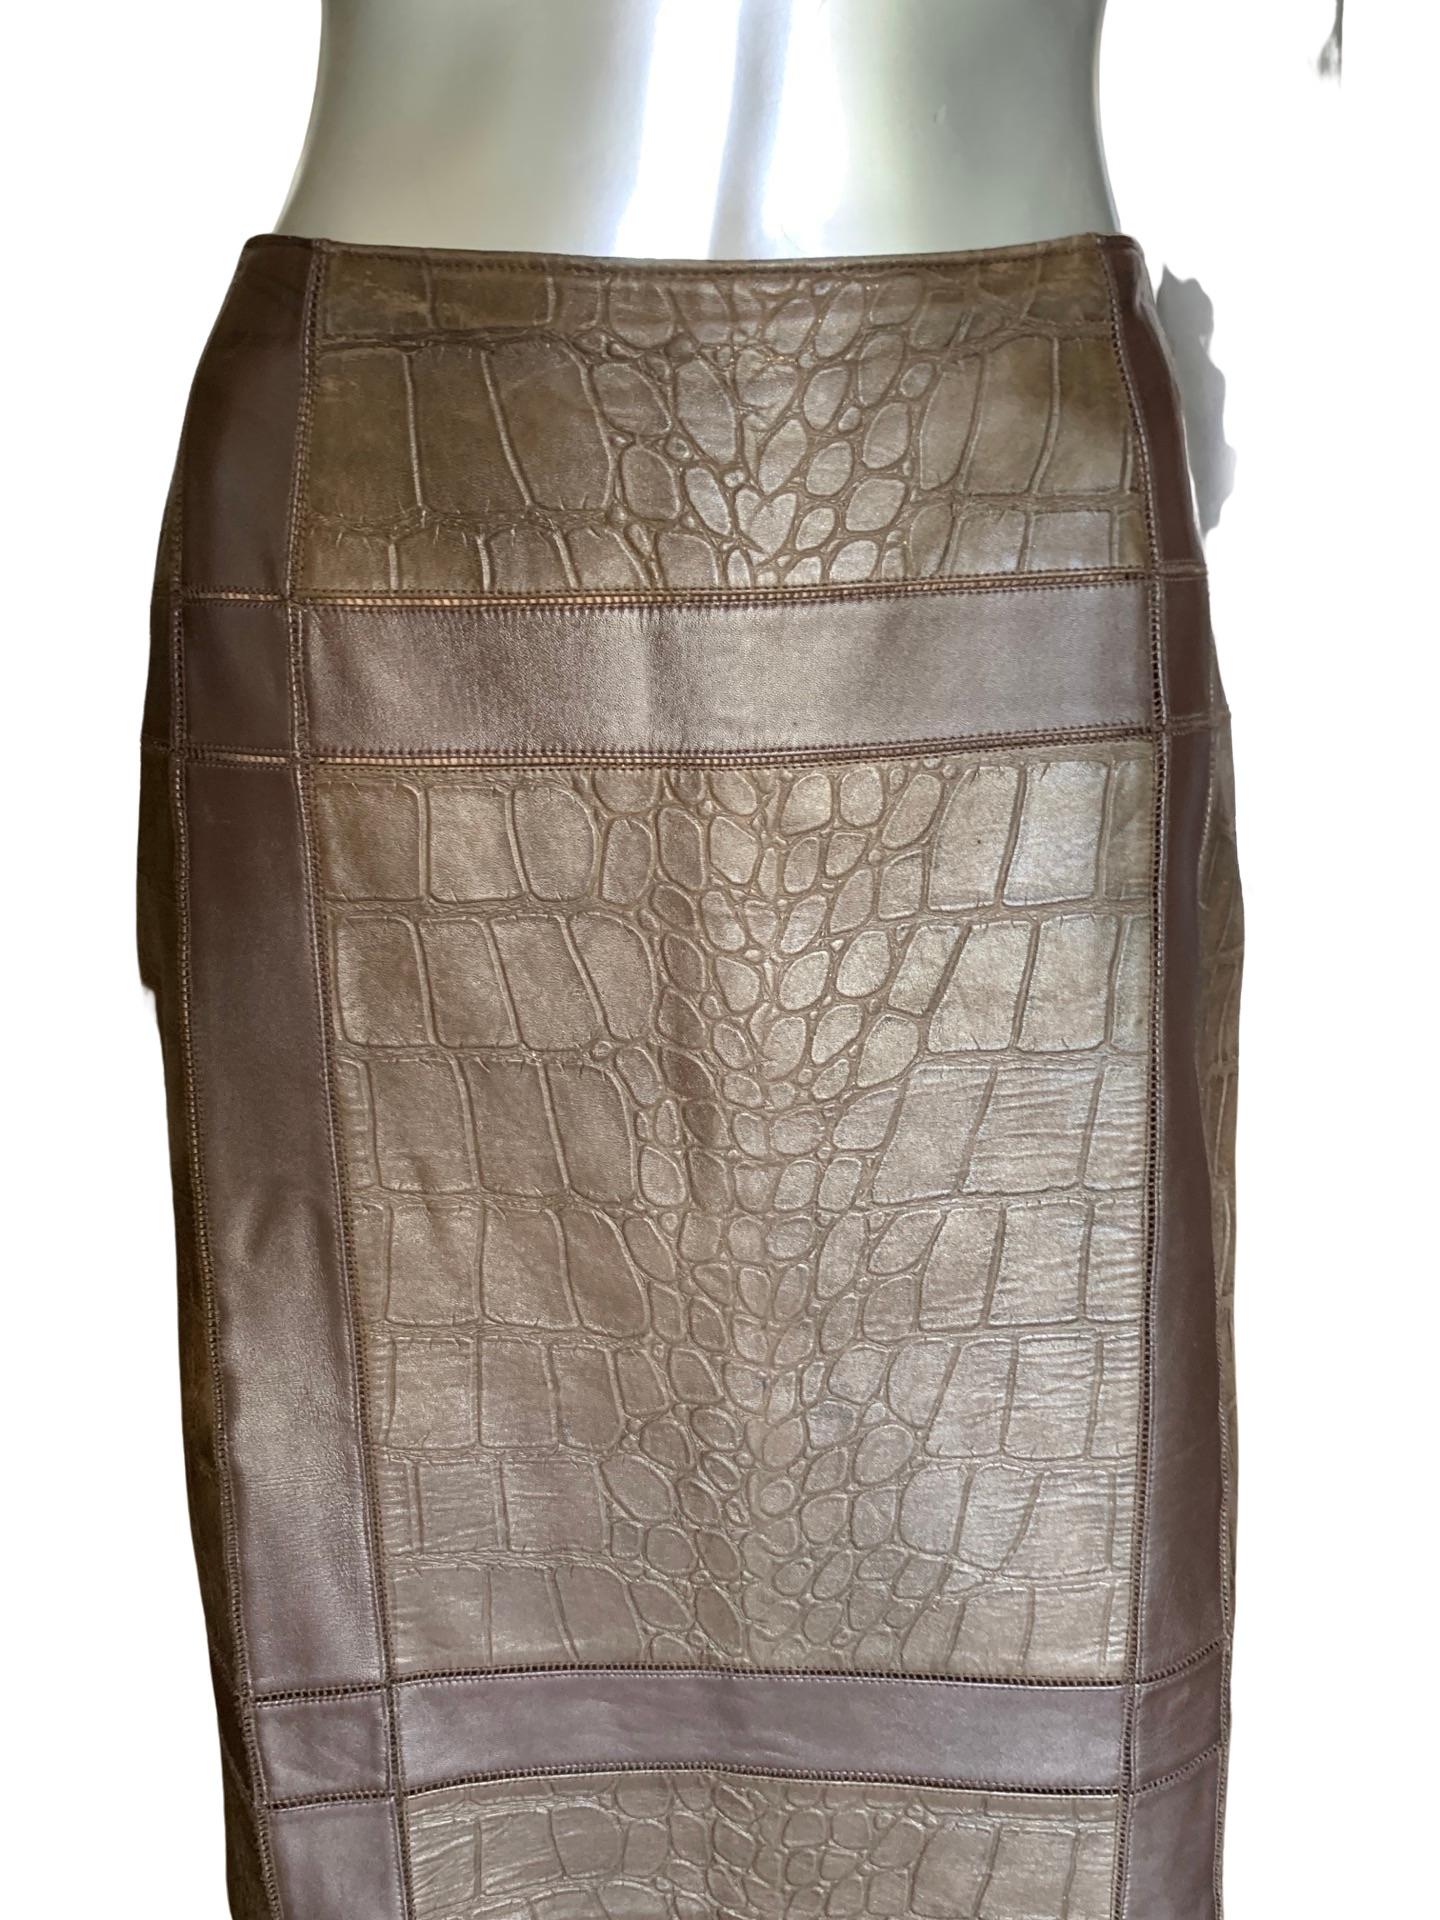 Oscar de la Renta Luxe Brown Leather Alligator Embossed Skirt SFA Size 10  In Good Condition For Sale In Palm Springs, CA